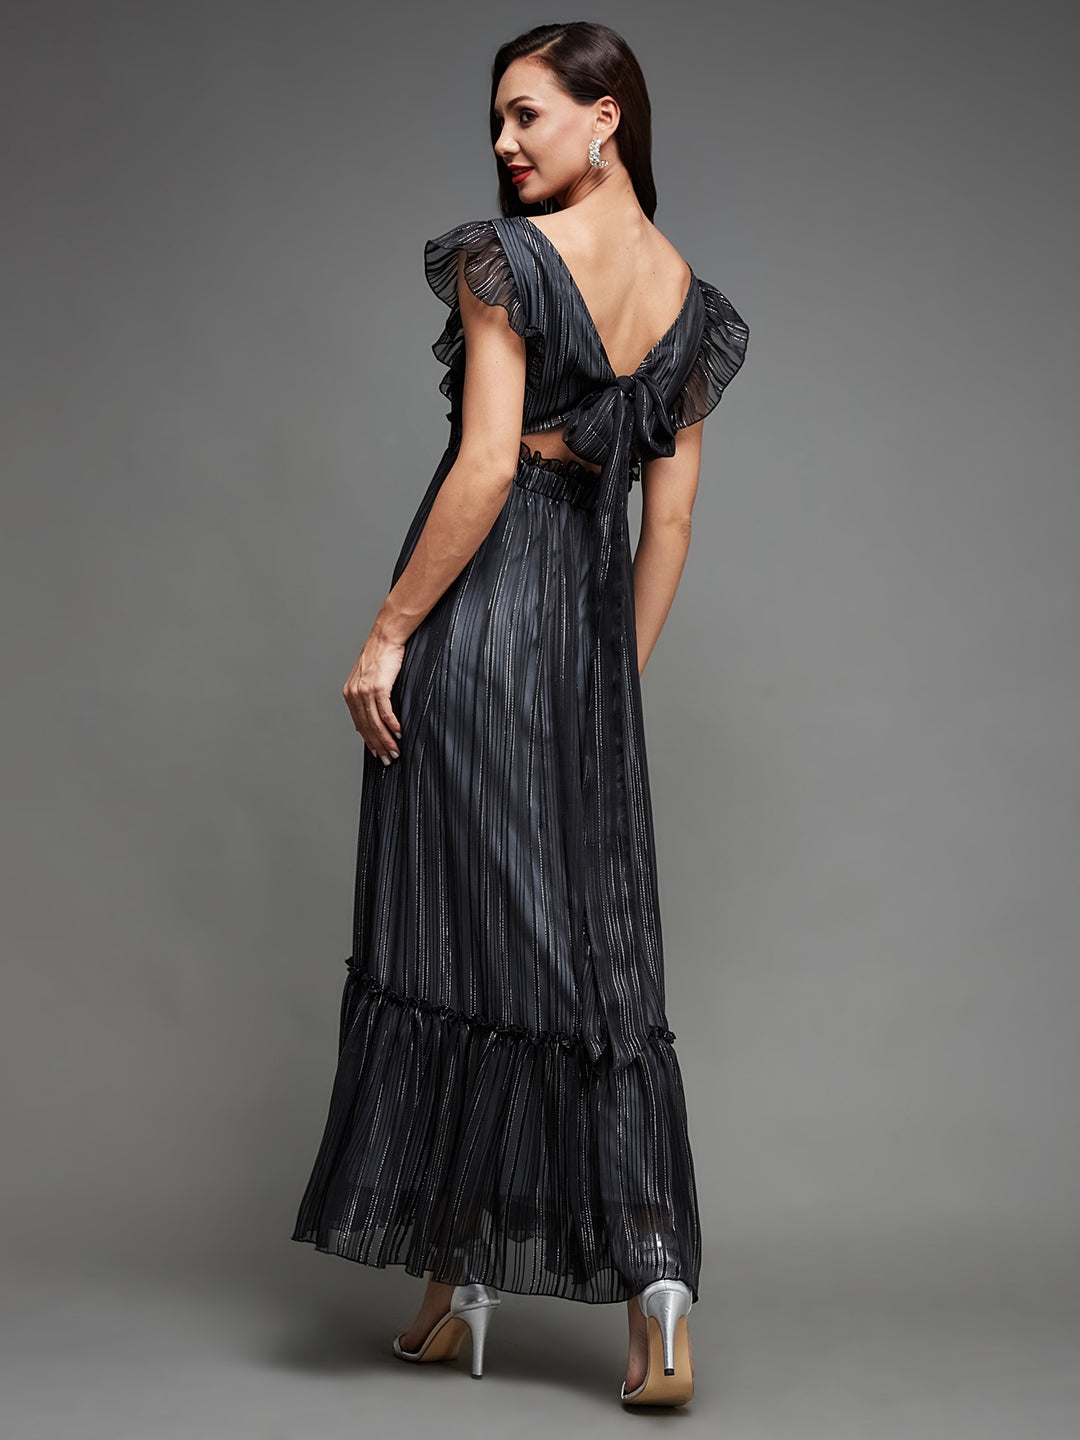 MISS CHASE | Black Square Neck Layered Ruffles Sleeve Floral Patterned Tiered Maxi Georgette Dress